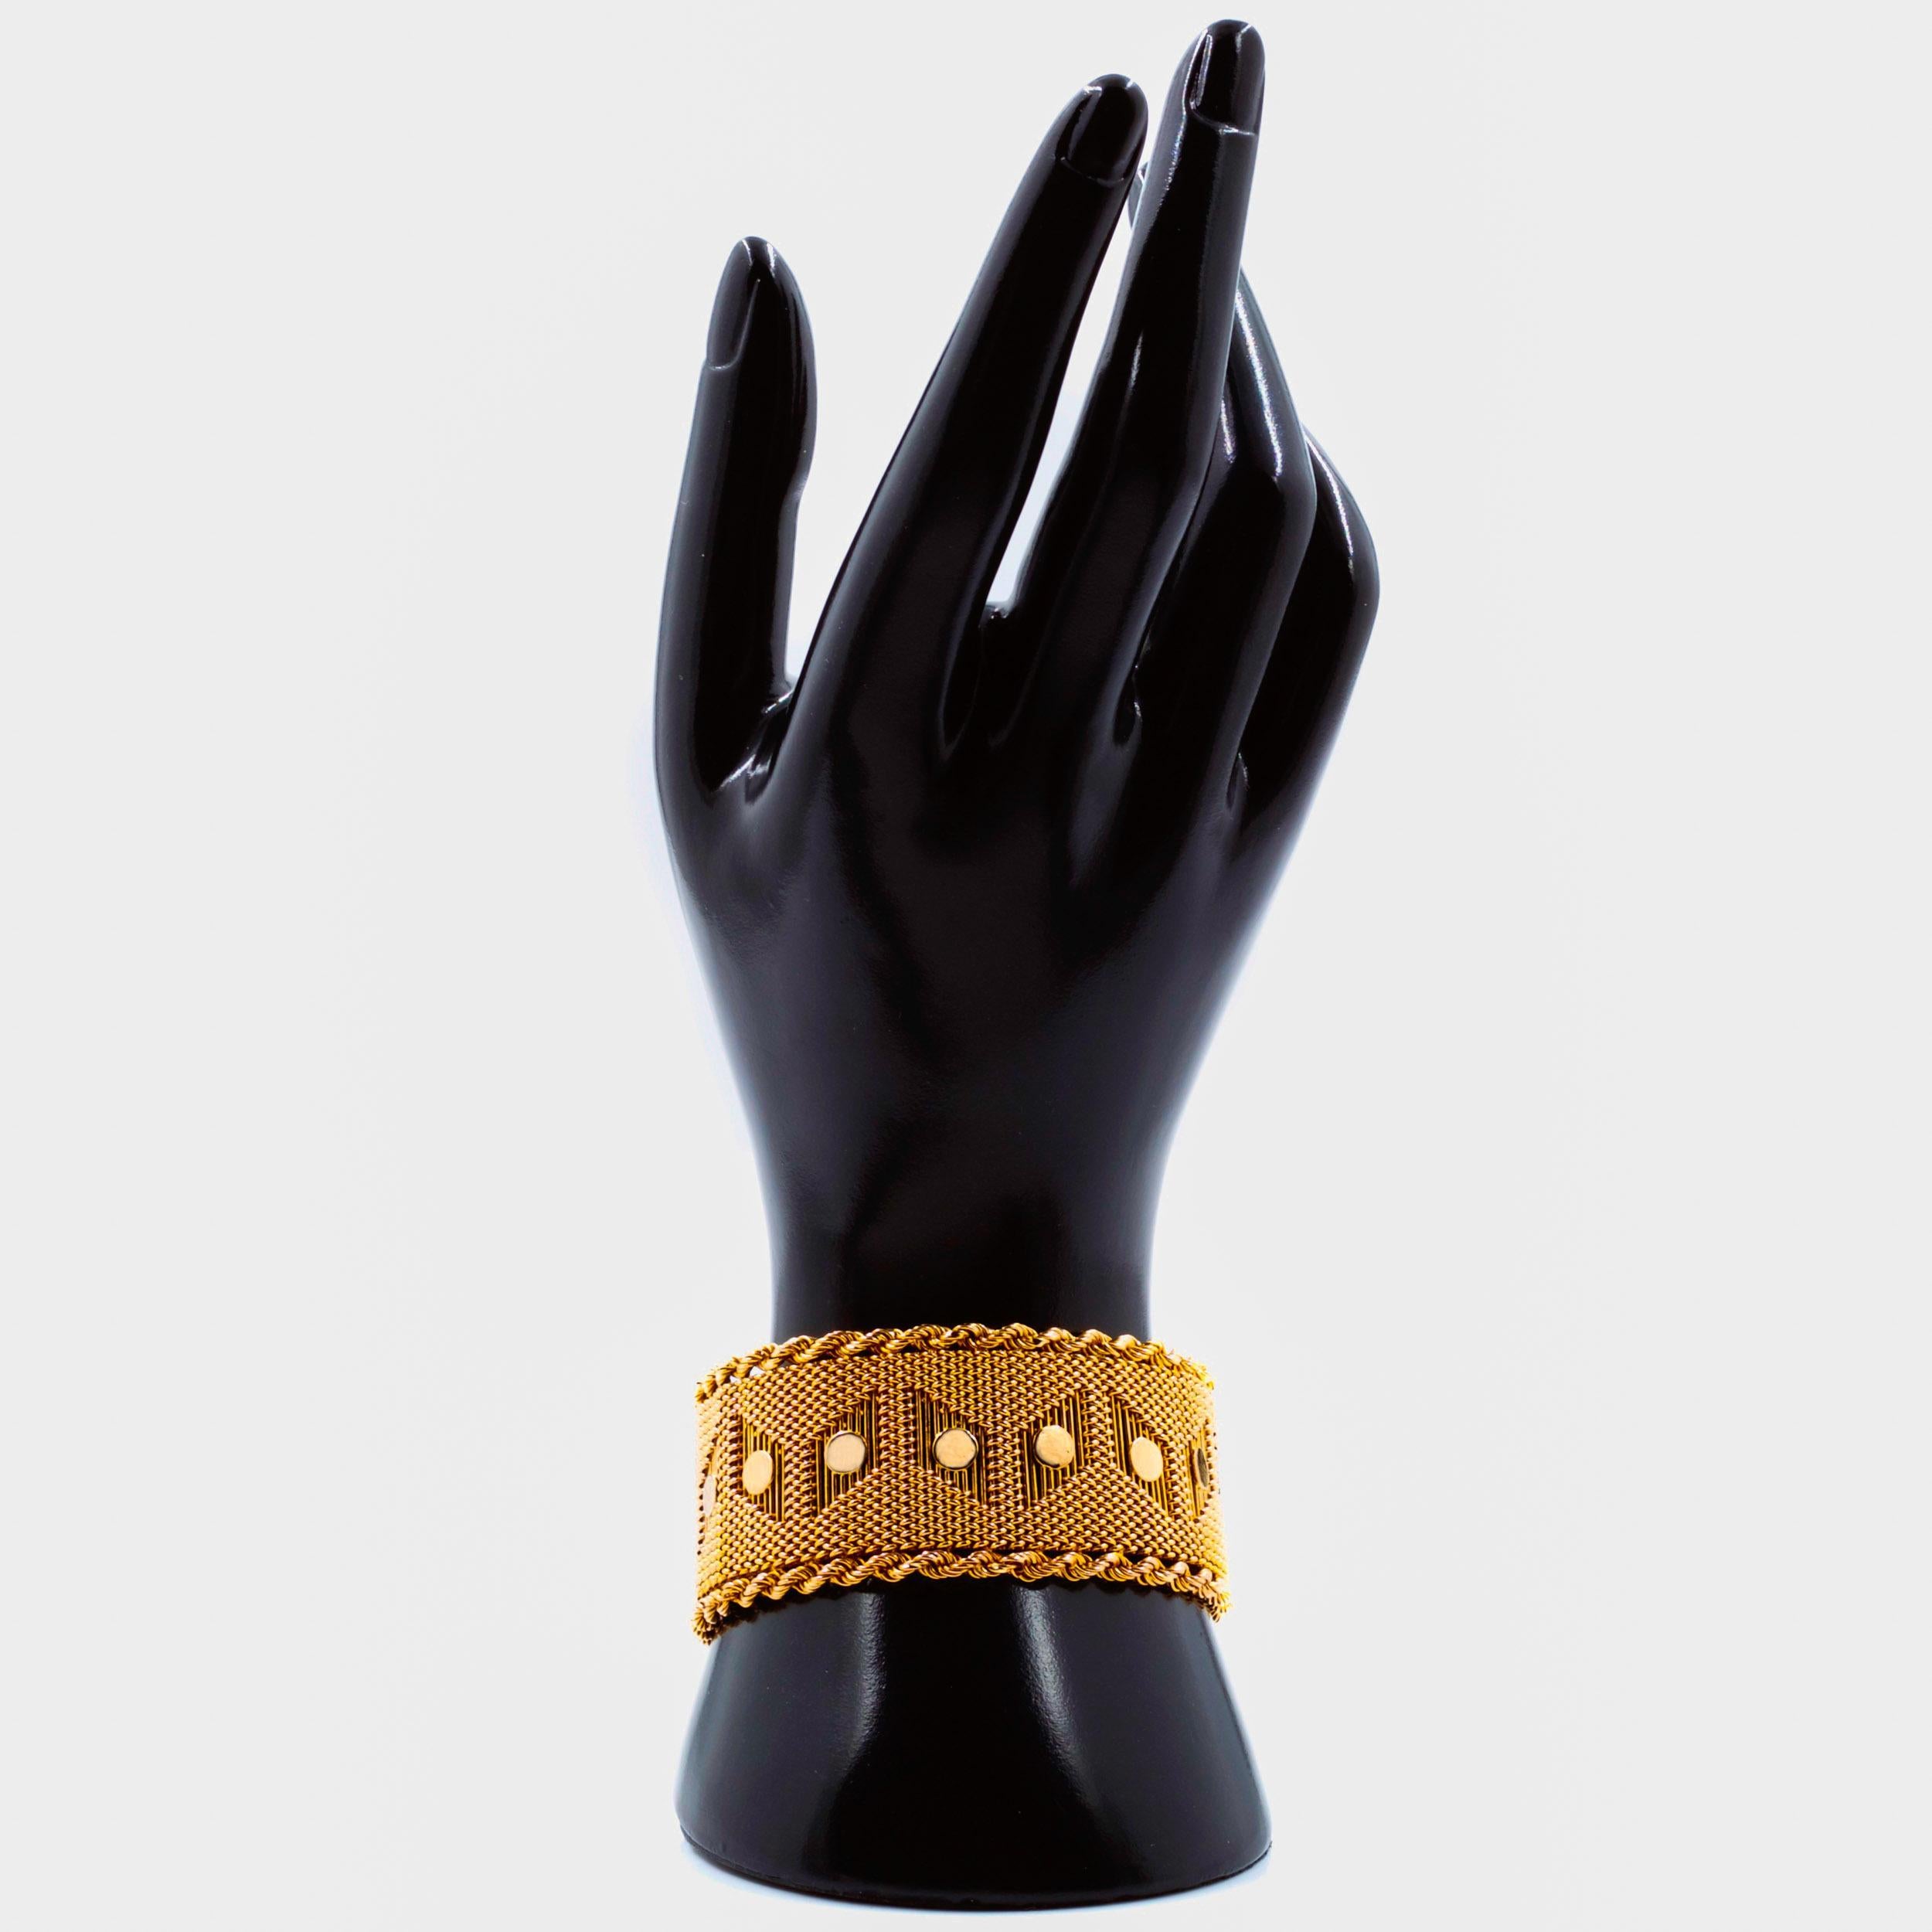 18K YELLOW GOLD MID-CENTURY MODERN WOVEN BRACELET
Item # 101PJR07R 

This gorgeous bracelet features a distinct geometrical design with parallelogram formations holding a high-polish circle surrounded by incredibly dense and complex weaving, the